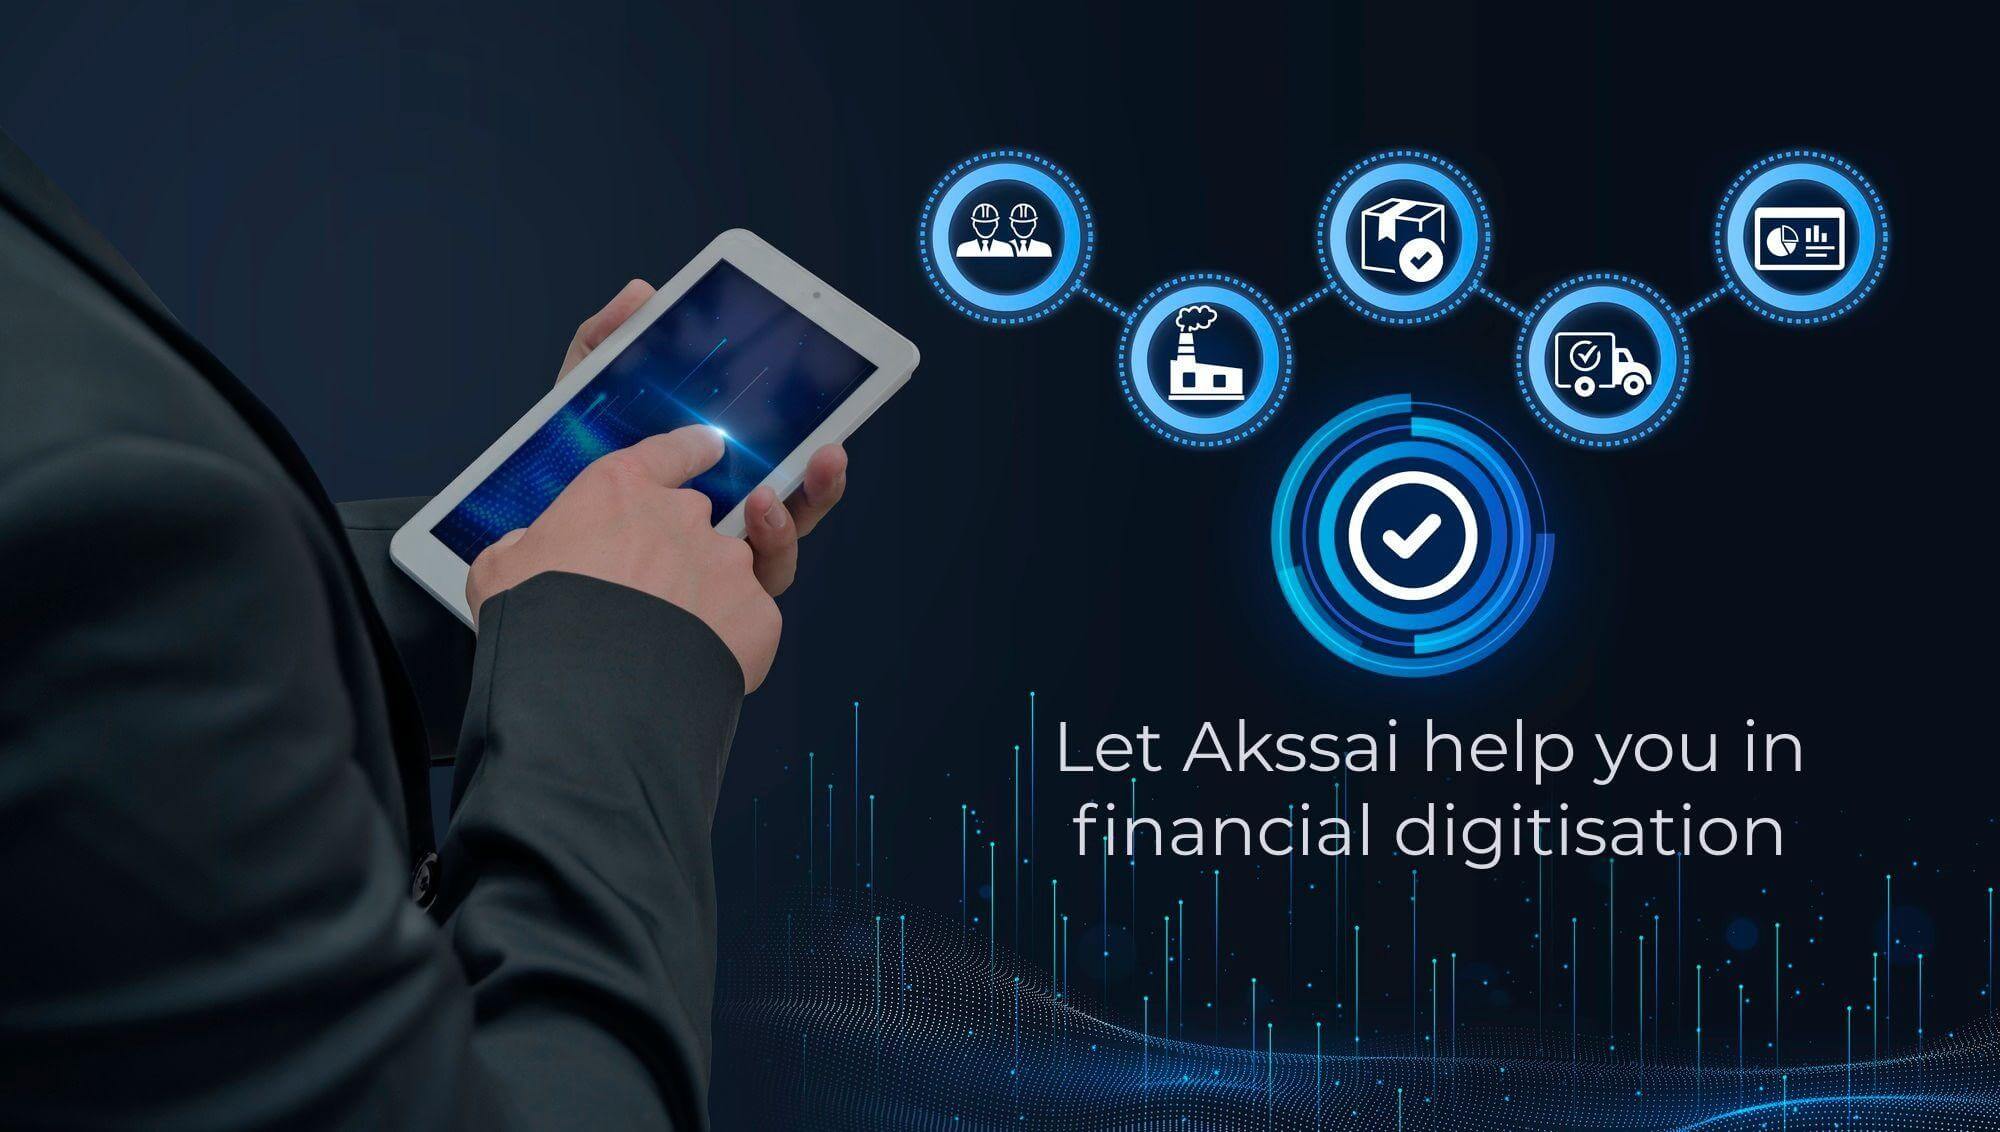 How can AKSSAI Help in Digitizing Financial Services